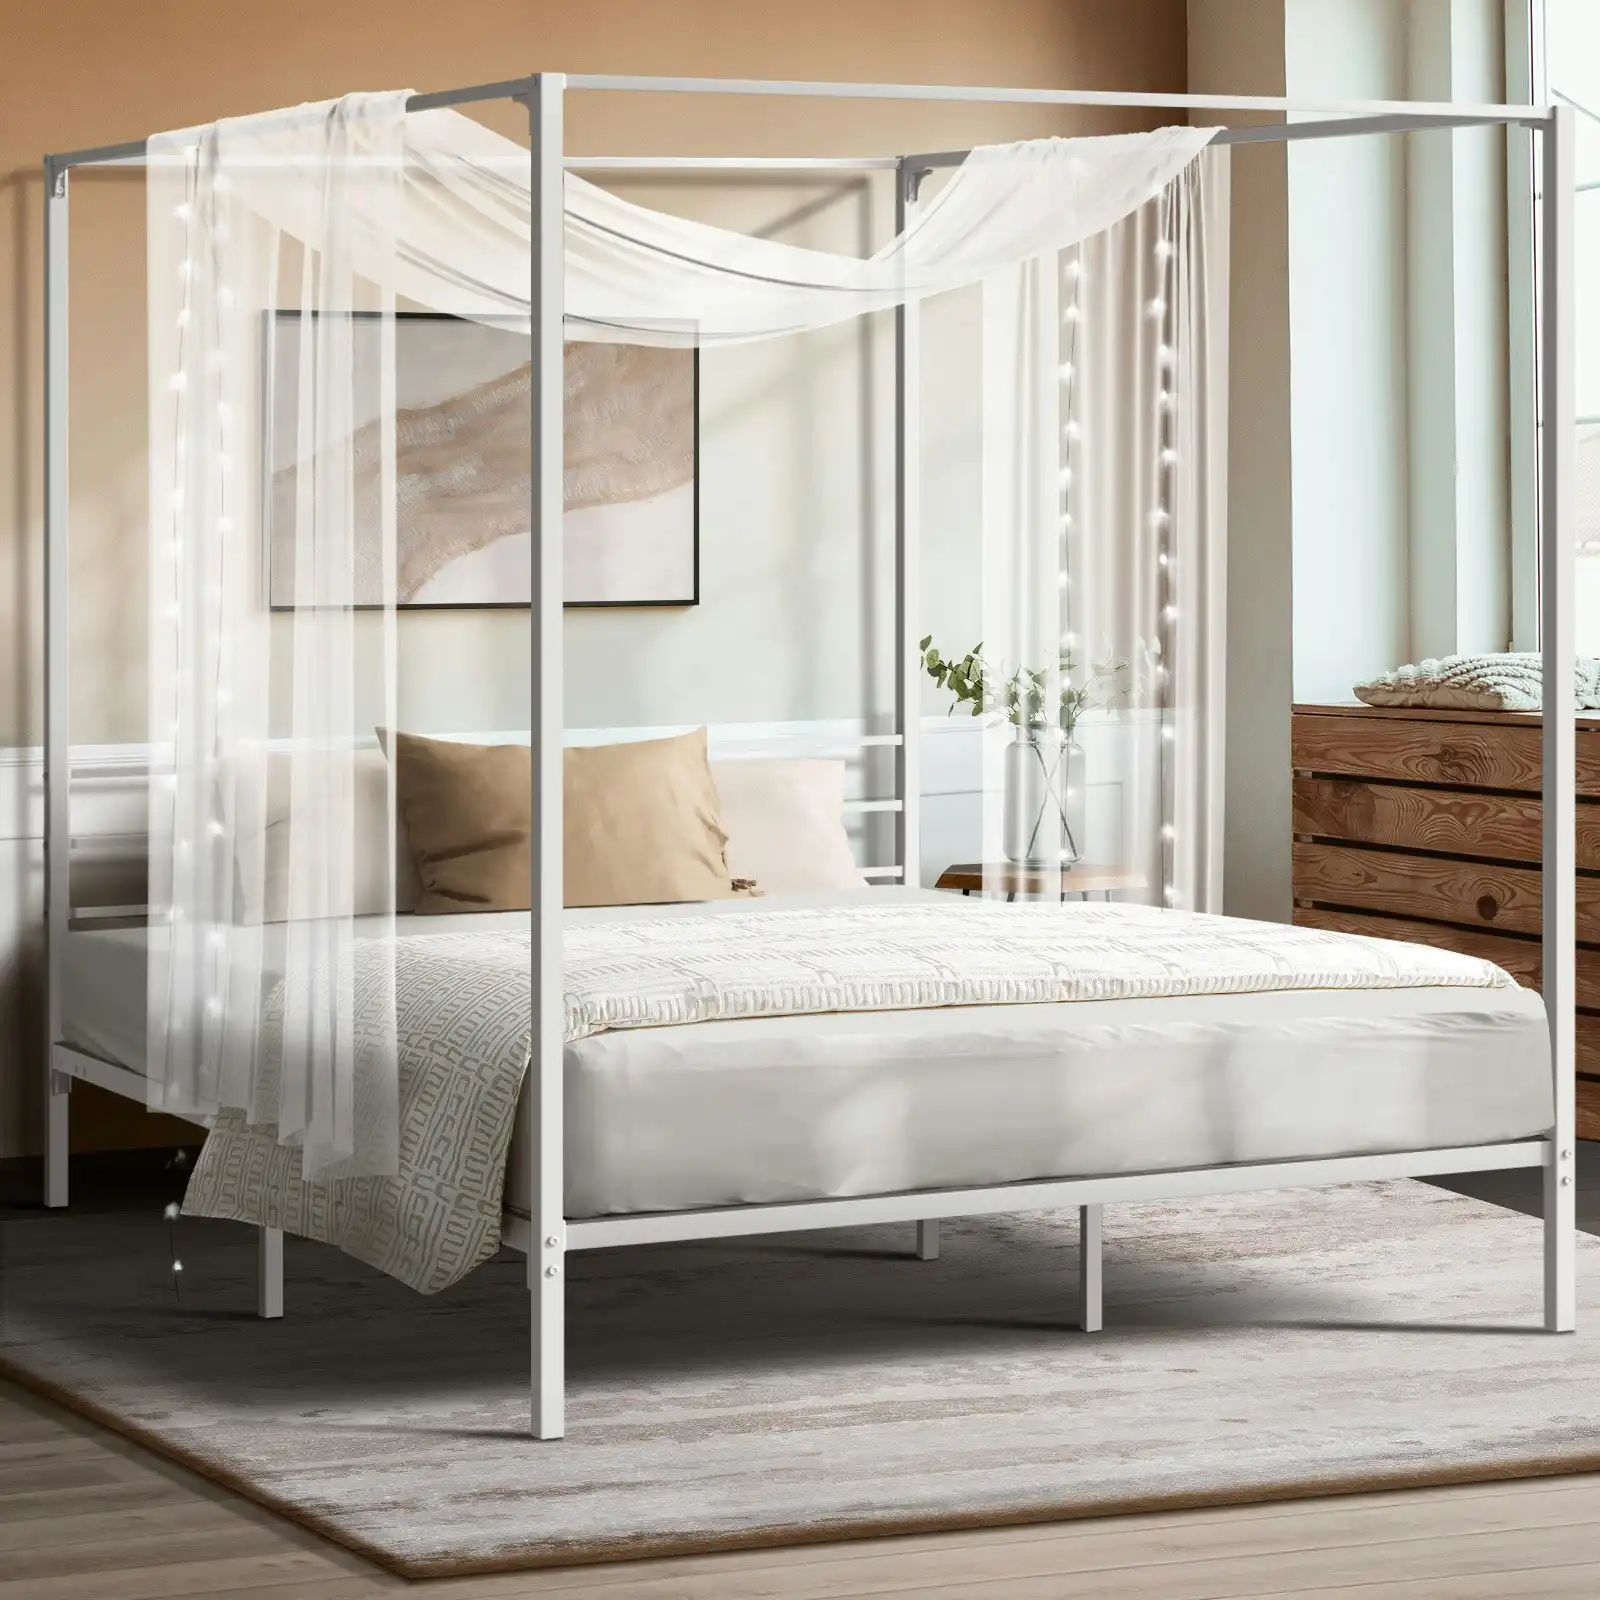 Oikiture Metal Canopy Bed Frame Double Size Beds Platform White